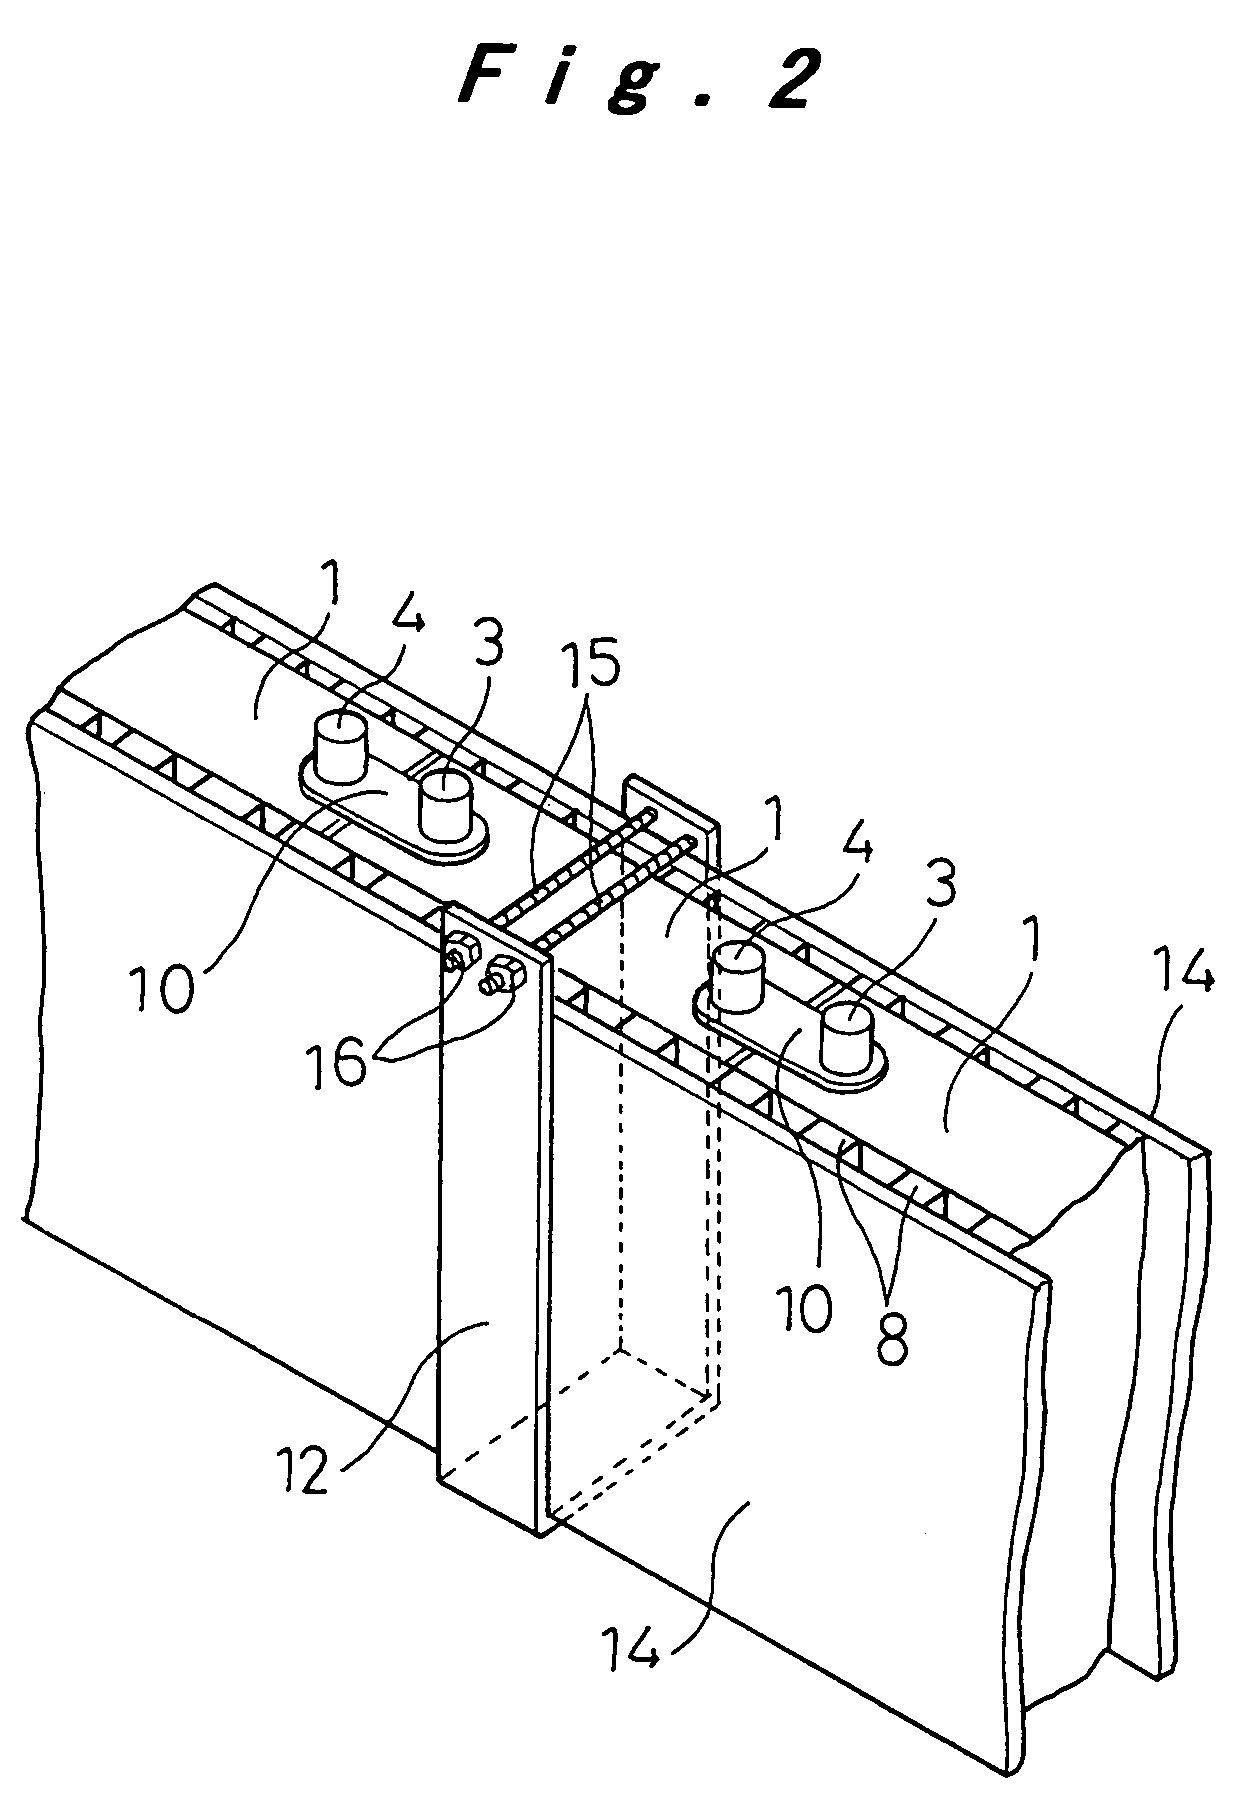 Battery pack with thermal distribution configuration